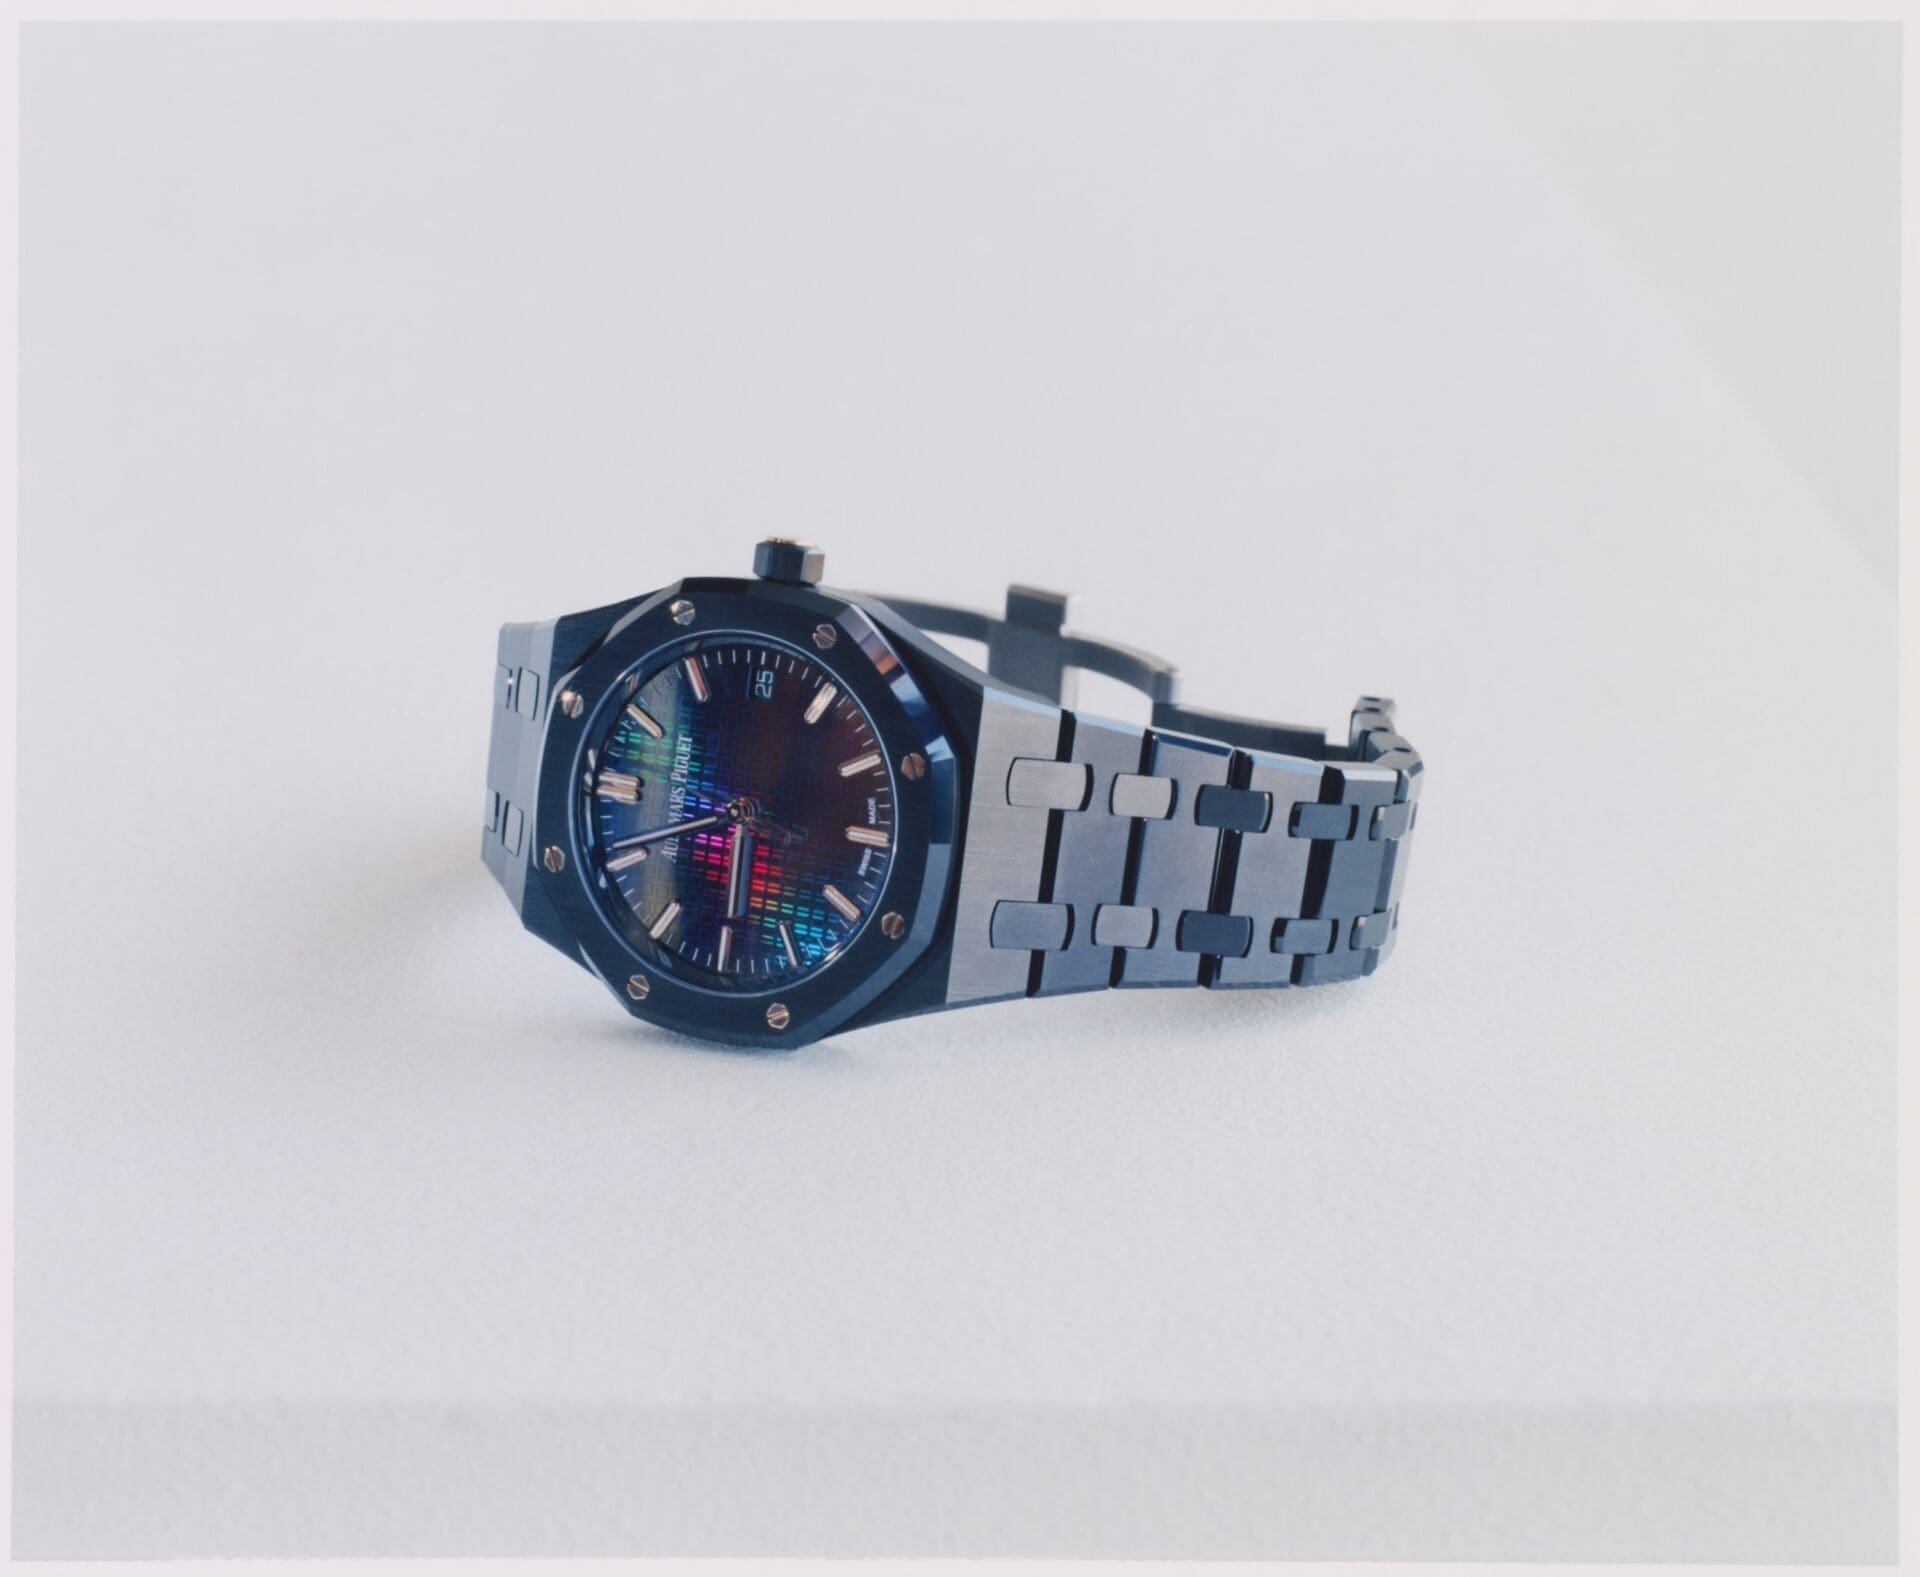 Is the new AP Royal Oak Carolina Bucci Limited Edition the best rainbow watch design ever made?